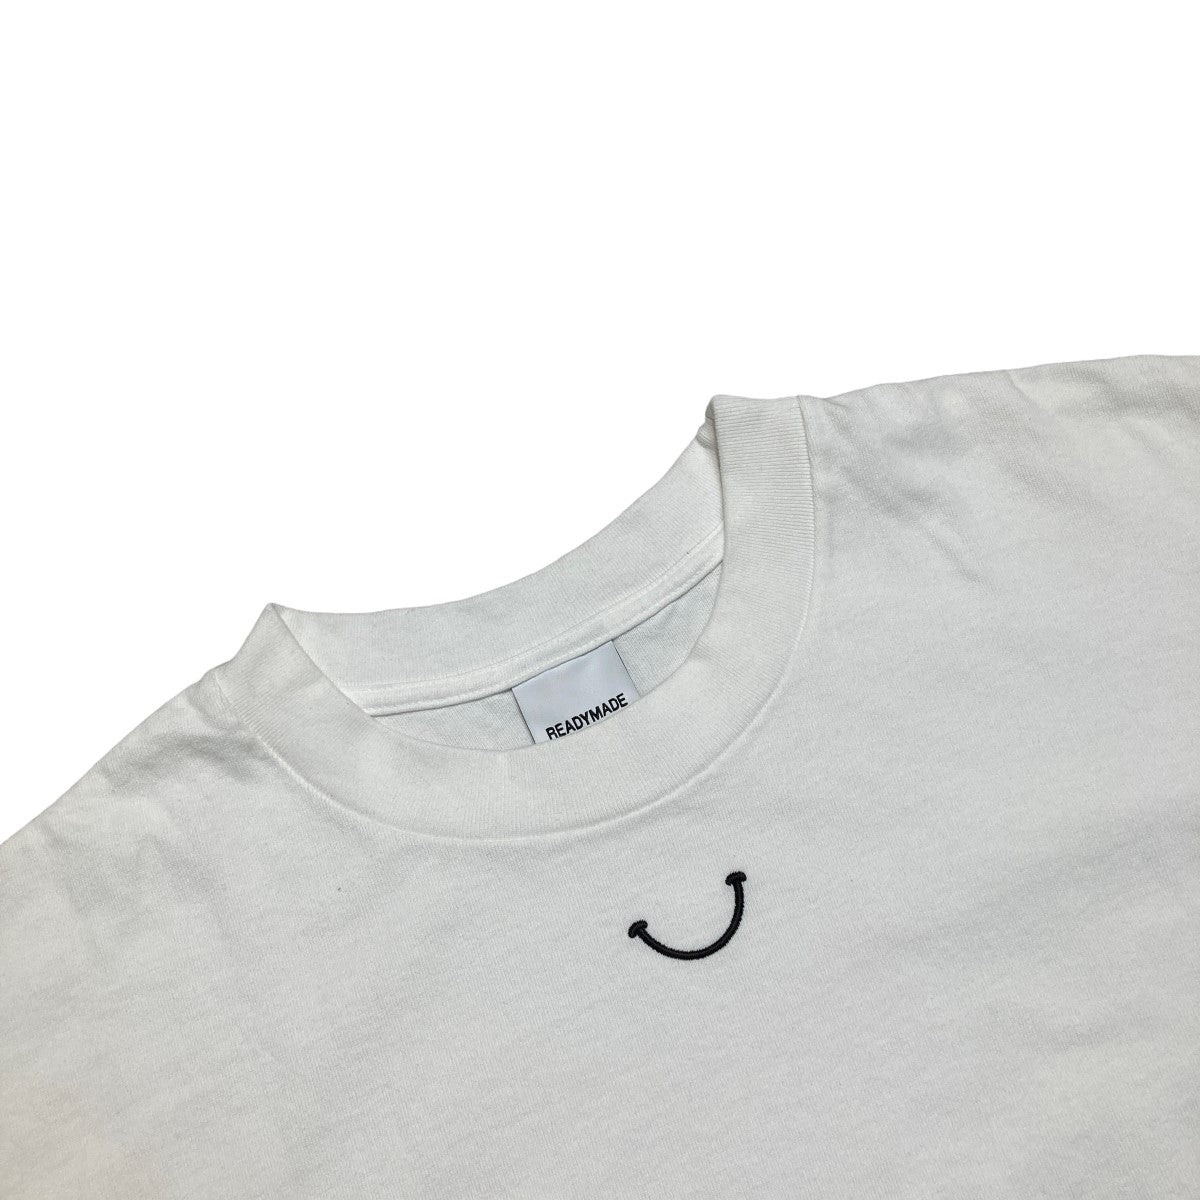 SMILE ＆ LOGO SHORT SLEEVE T 刺刺繍カットソー／RE-CO-WH-00-00-244